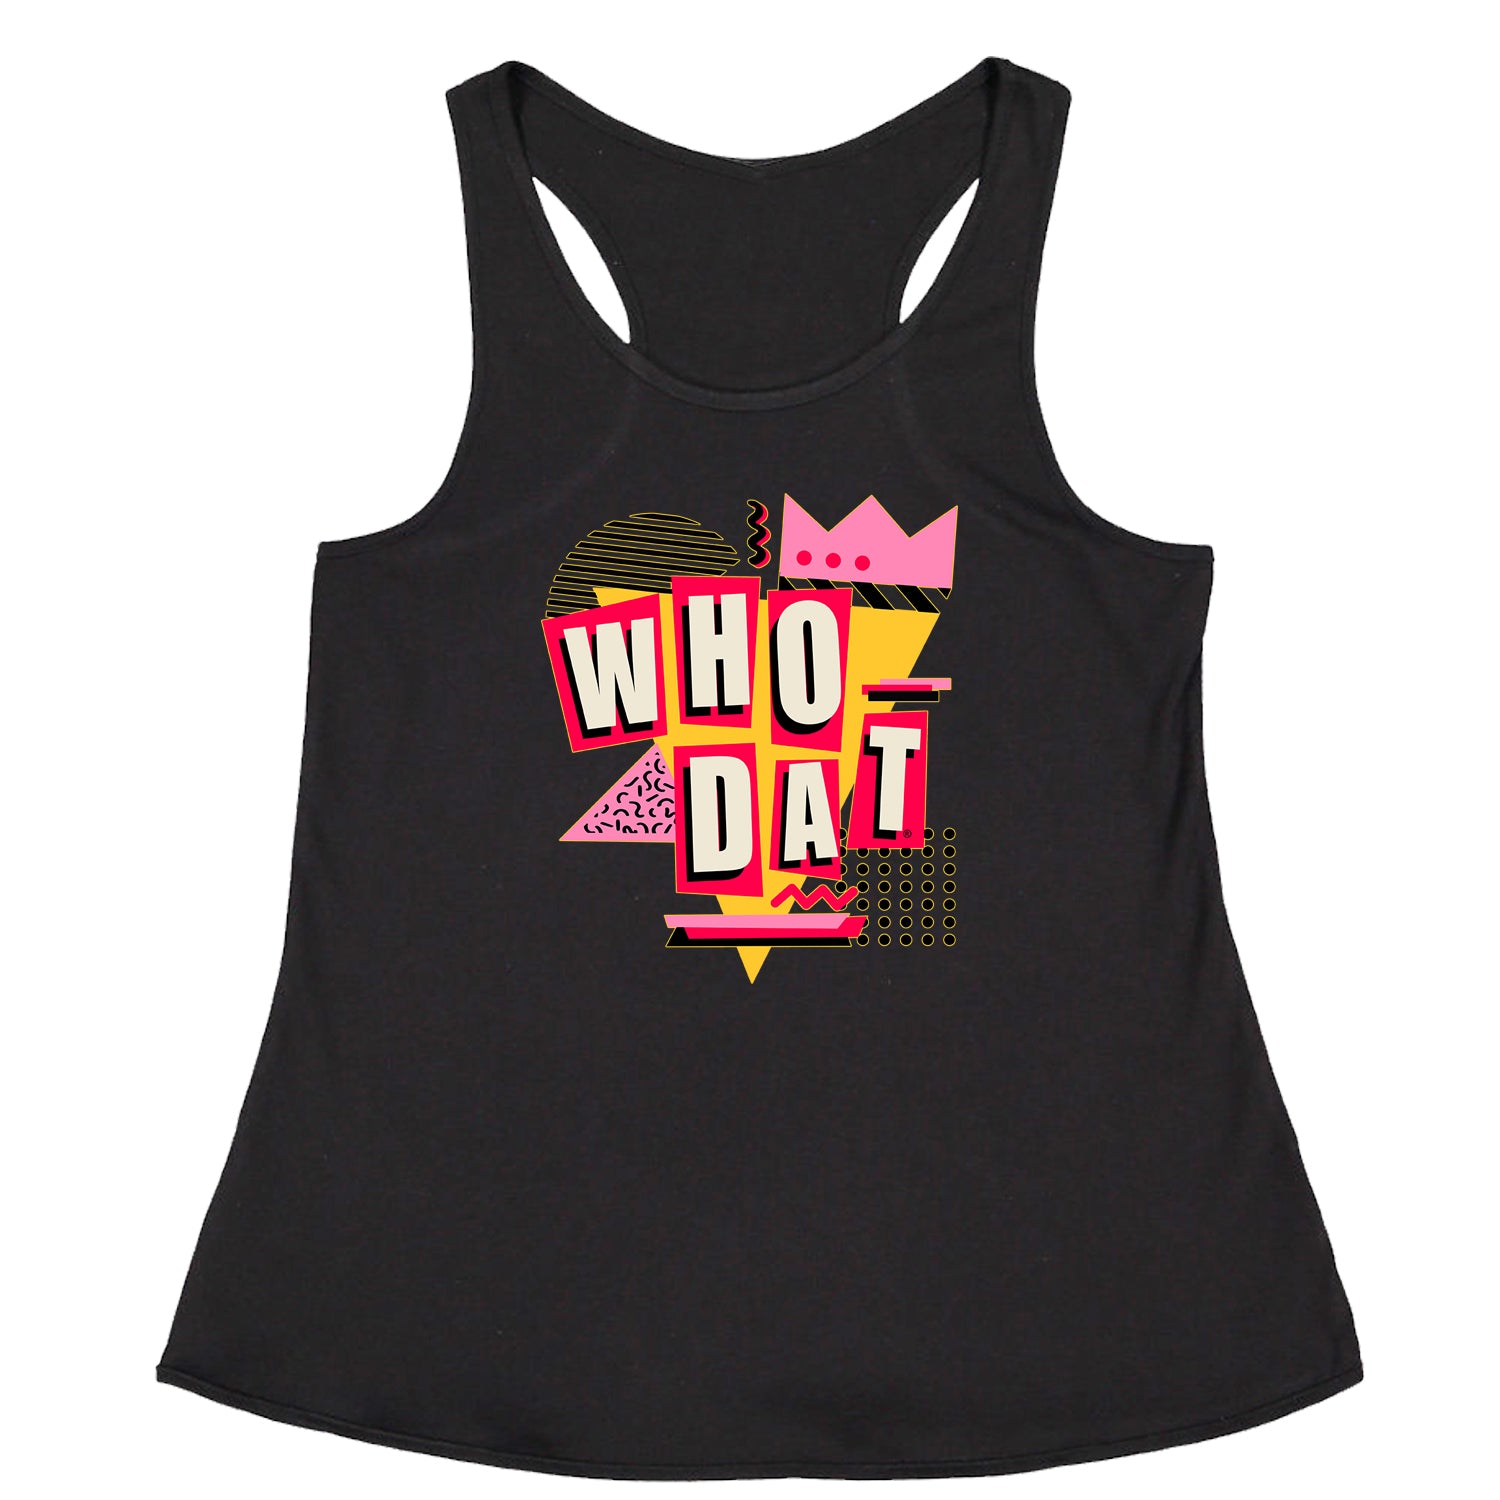 Who Dat New Orleans Racerback Tank Top for Women brees, colston, drew, louisiana, marques, payton, sean by Expression Tees